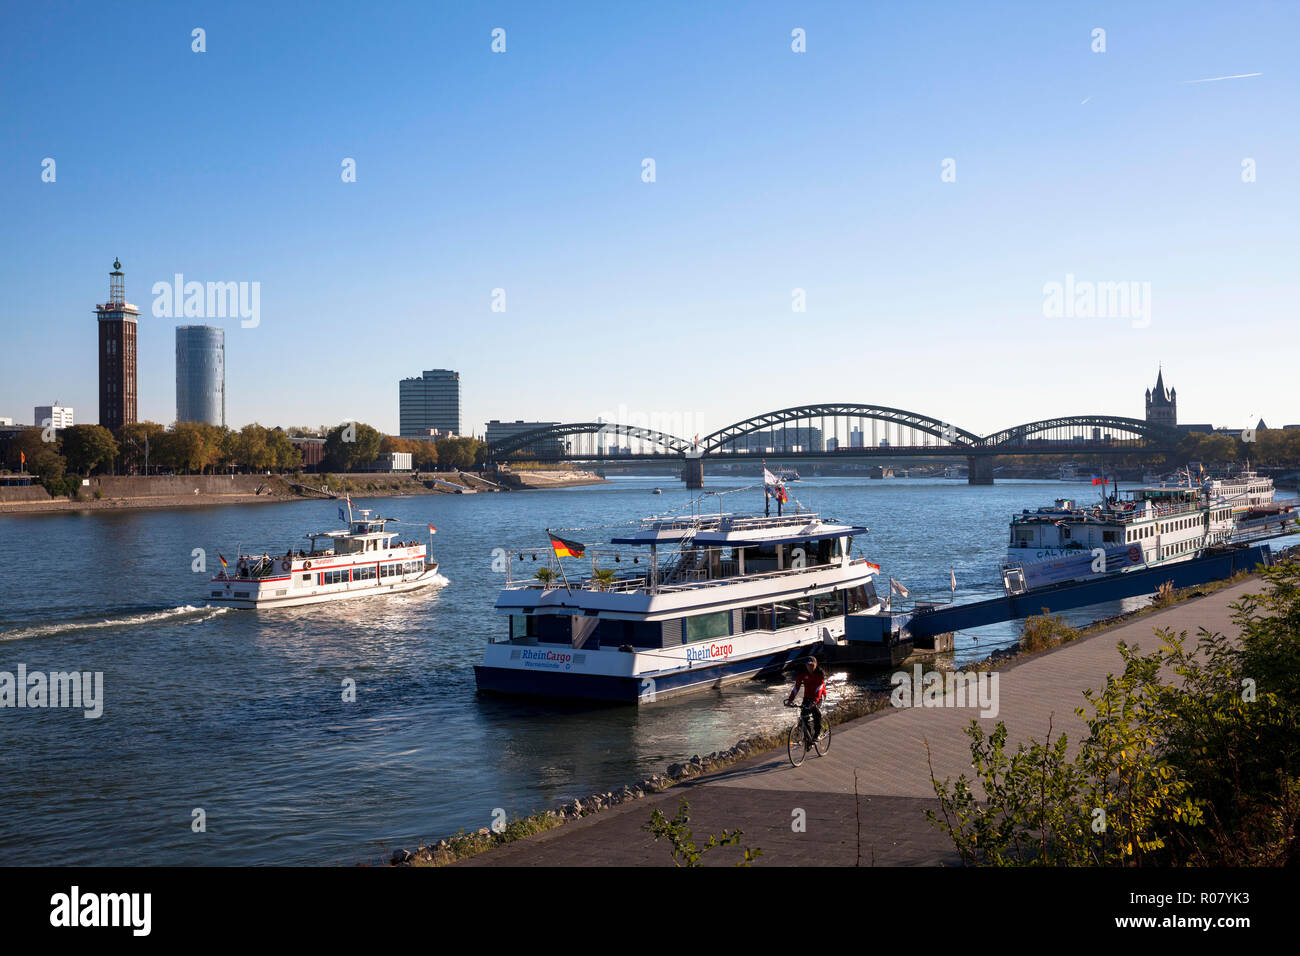 view across the river Rhine to the district Deutz, the old tower of the former exhibition center, the CologneTriangle skyscraper, the Lanxess Tower, t Stock Photo